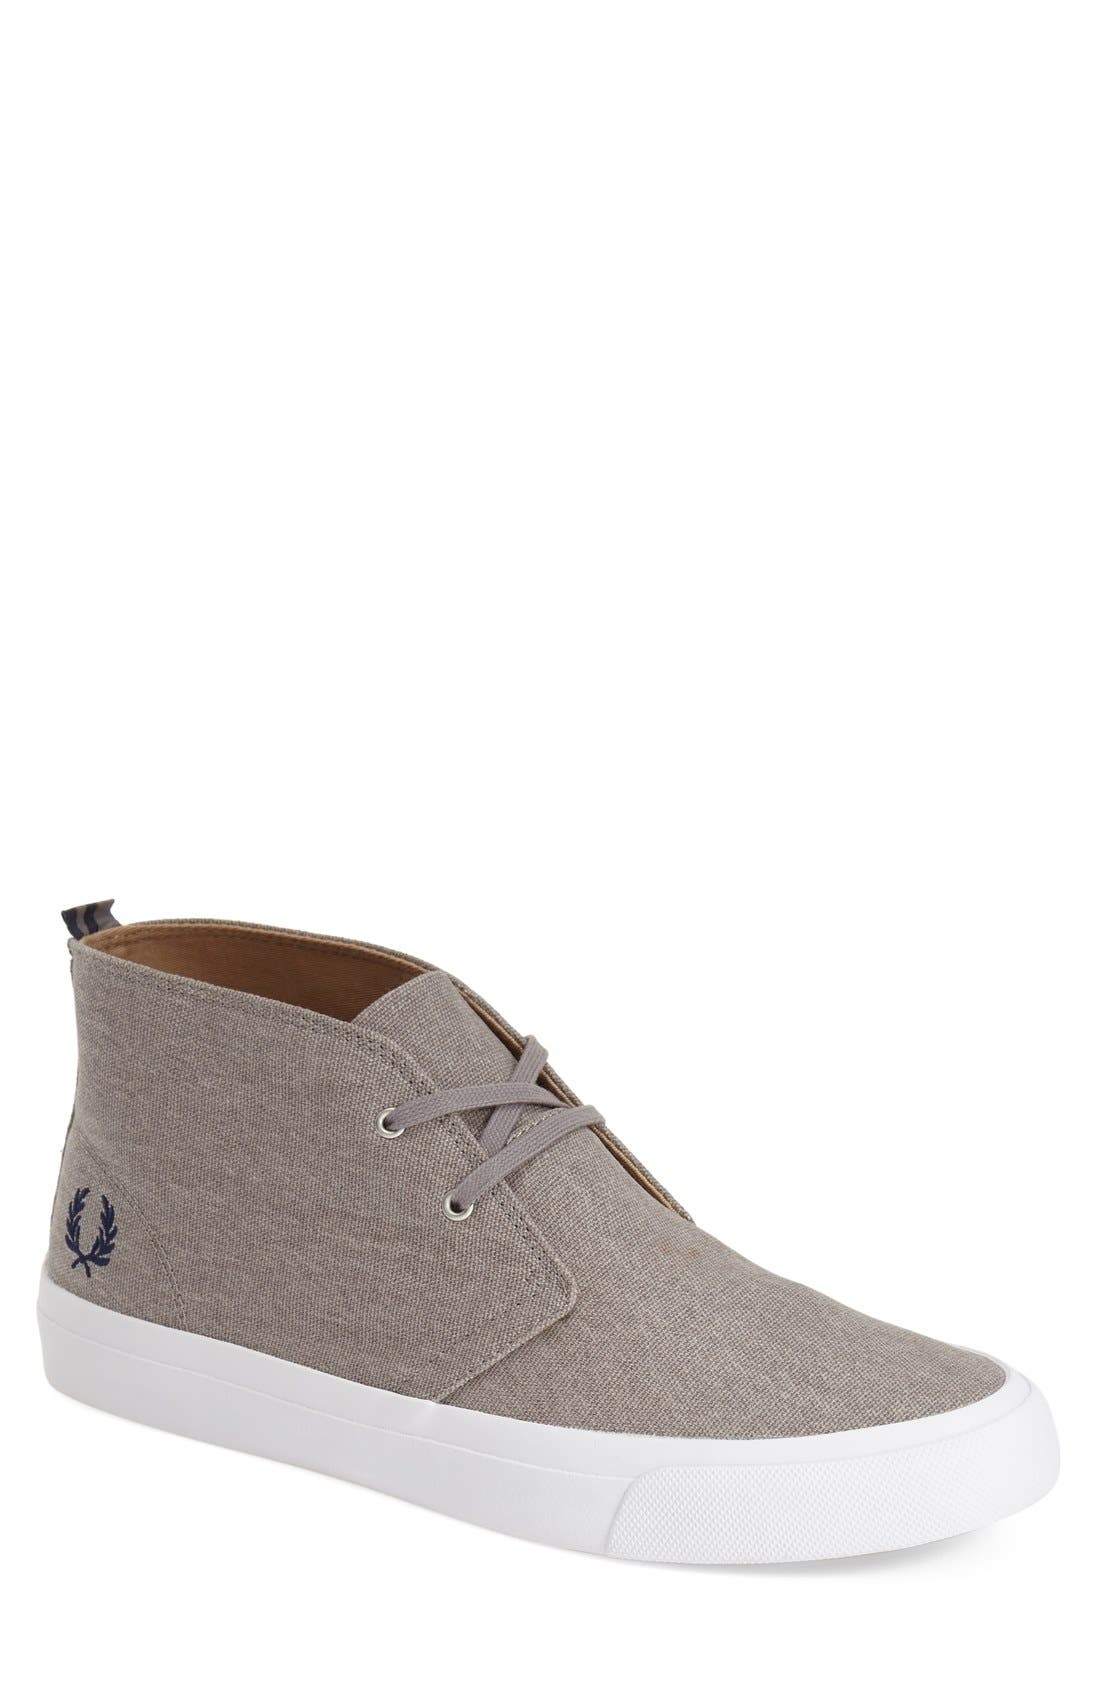 fred perry shoes nordstrom